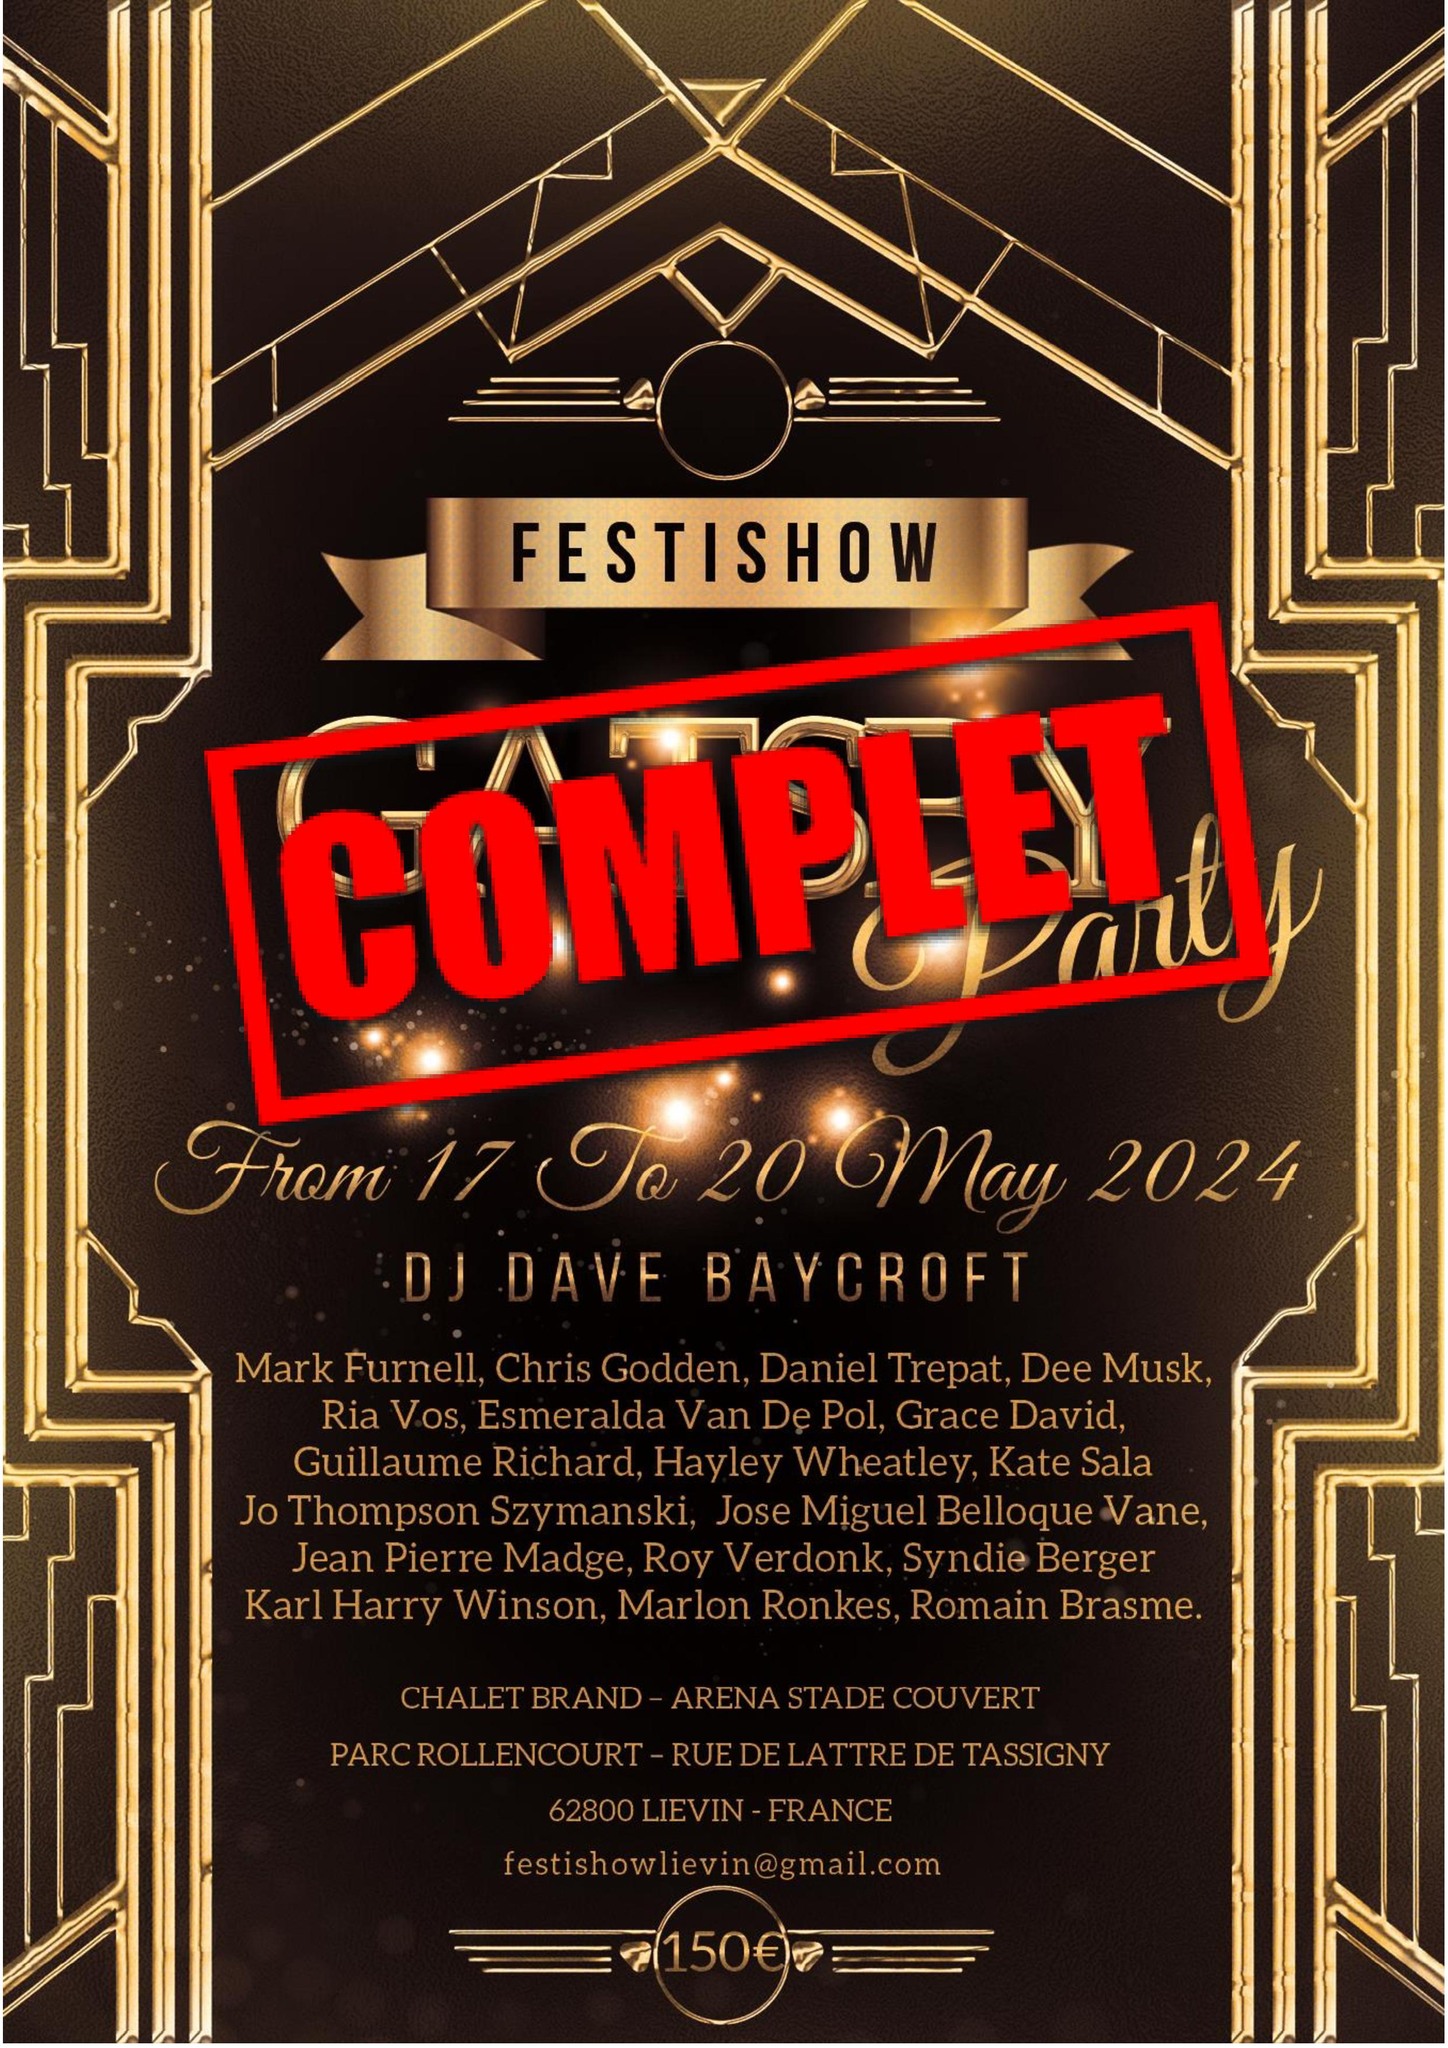 festishow complet 17 20 mai